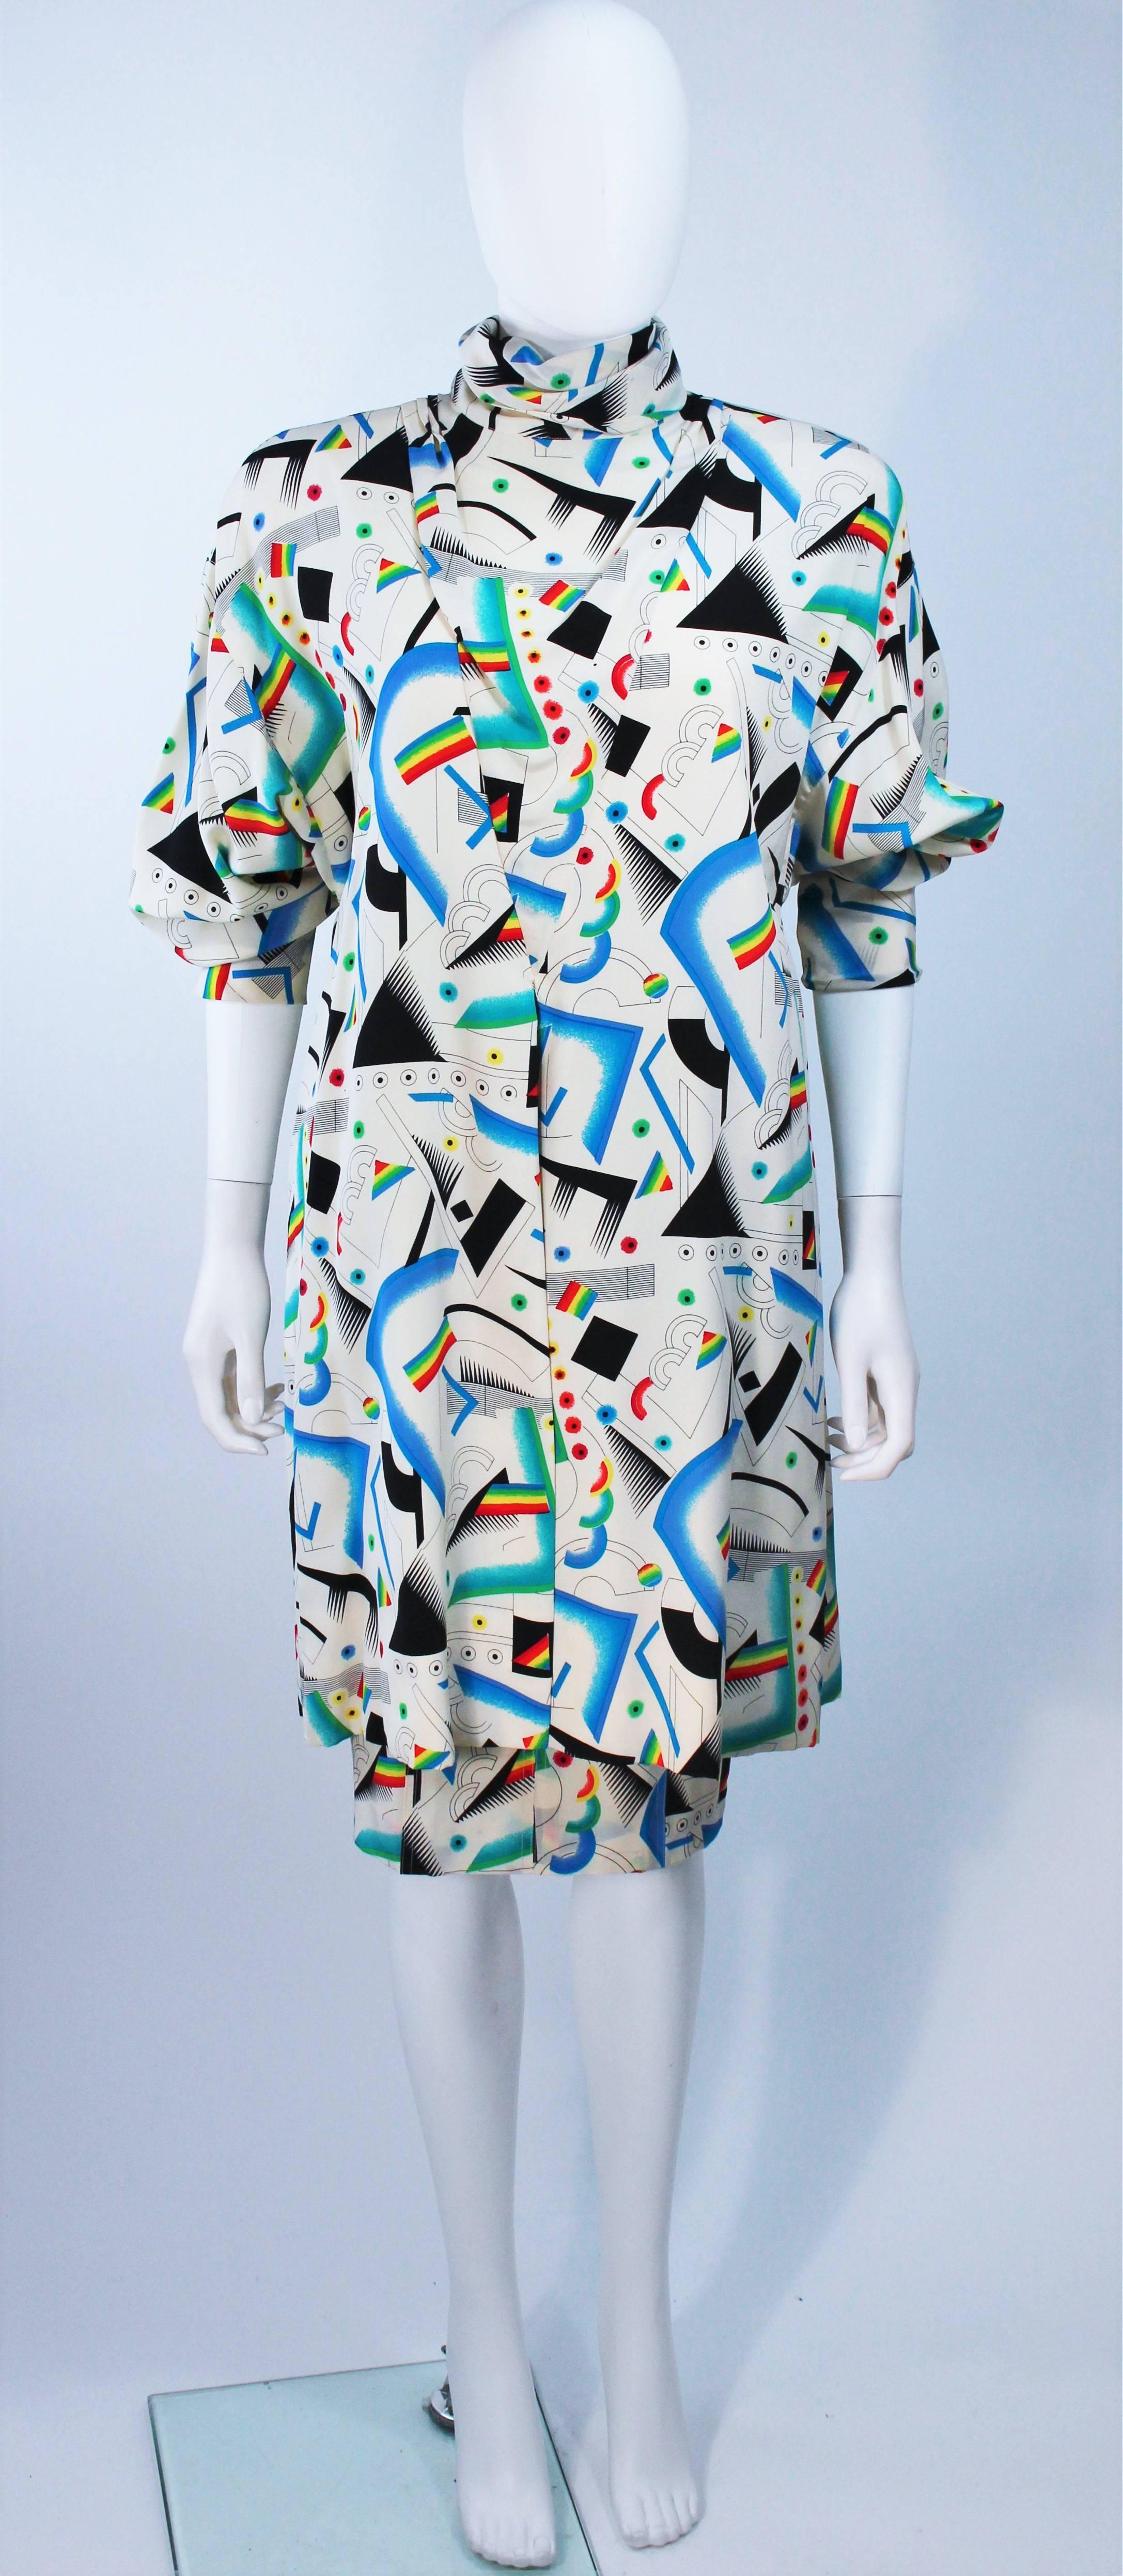  This Fendi ensemble is composed of an off white silk with a rainbow prism pattern throughout. The top is a long tunic style with a center back closure with pleat detail. The pencil style skirt features a zipper closure with front pockets. In